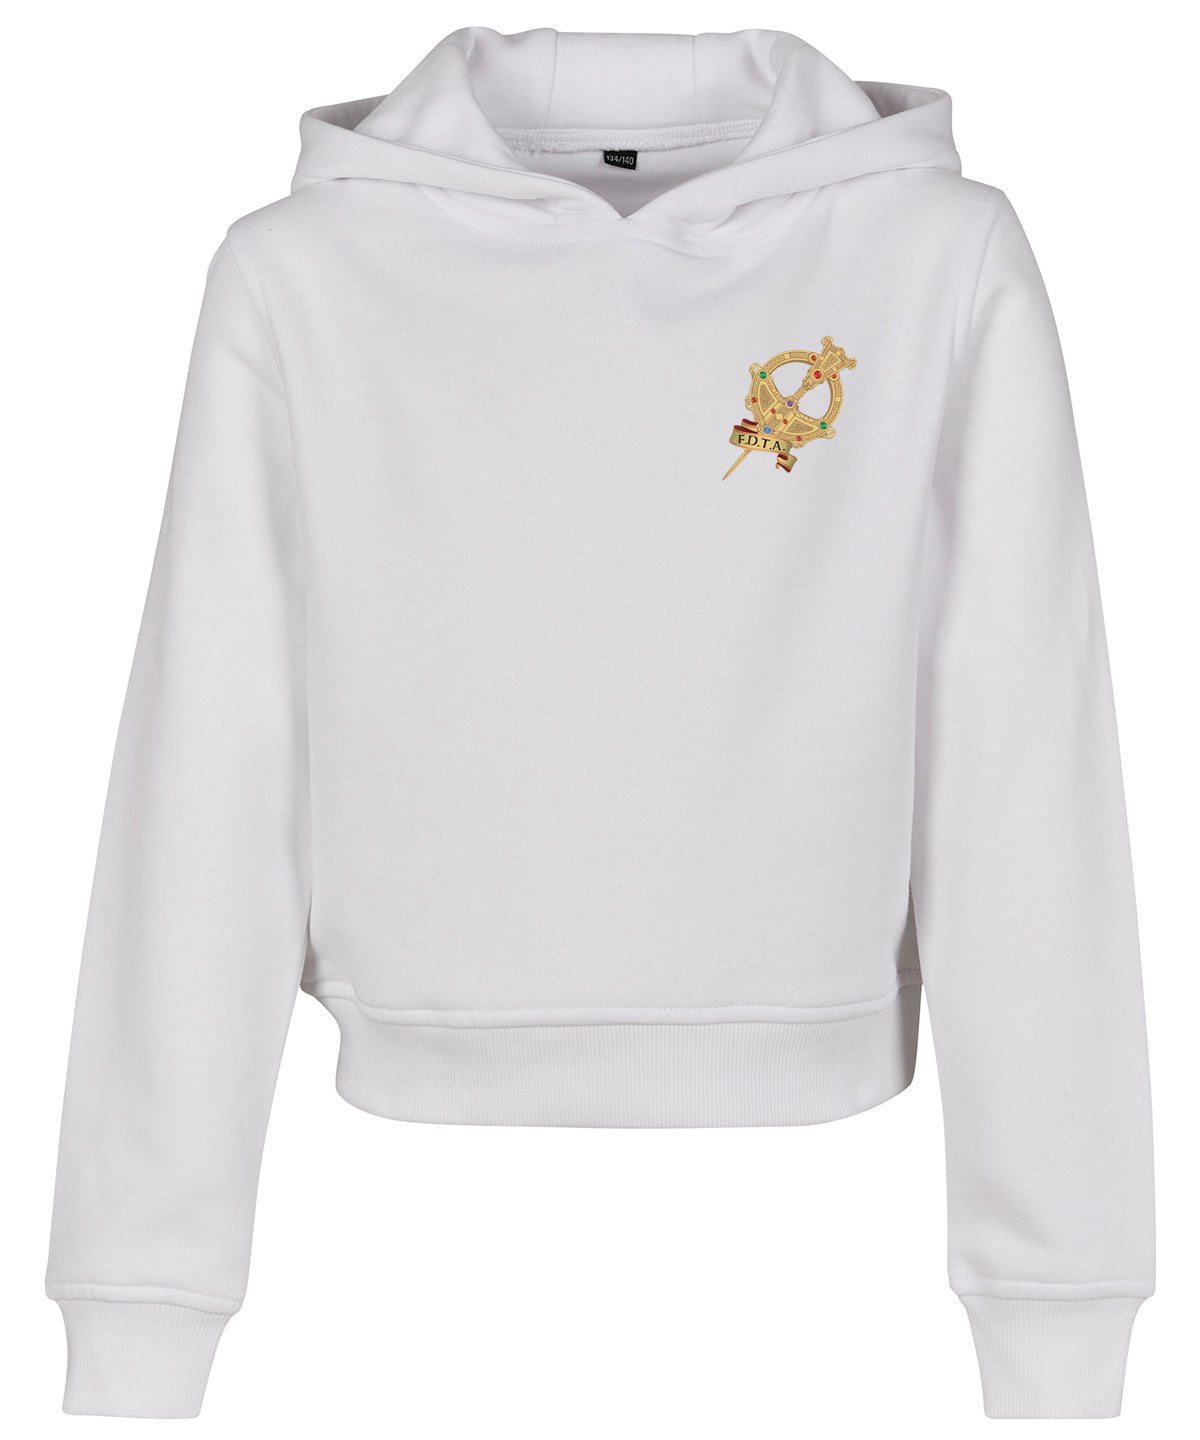 FDTA - Girls cropped sweat hoodie (Various Colours)